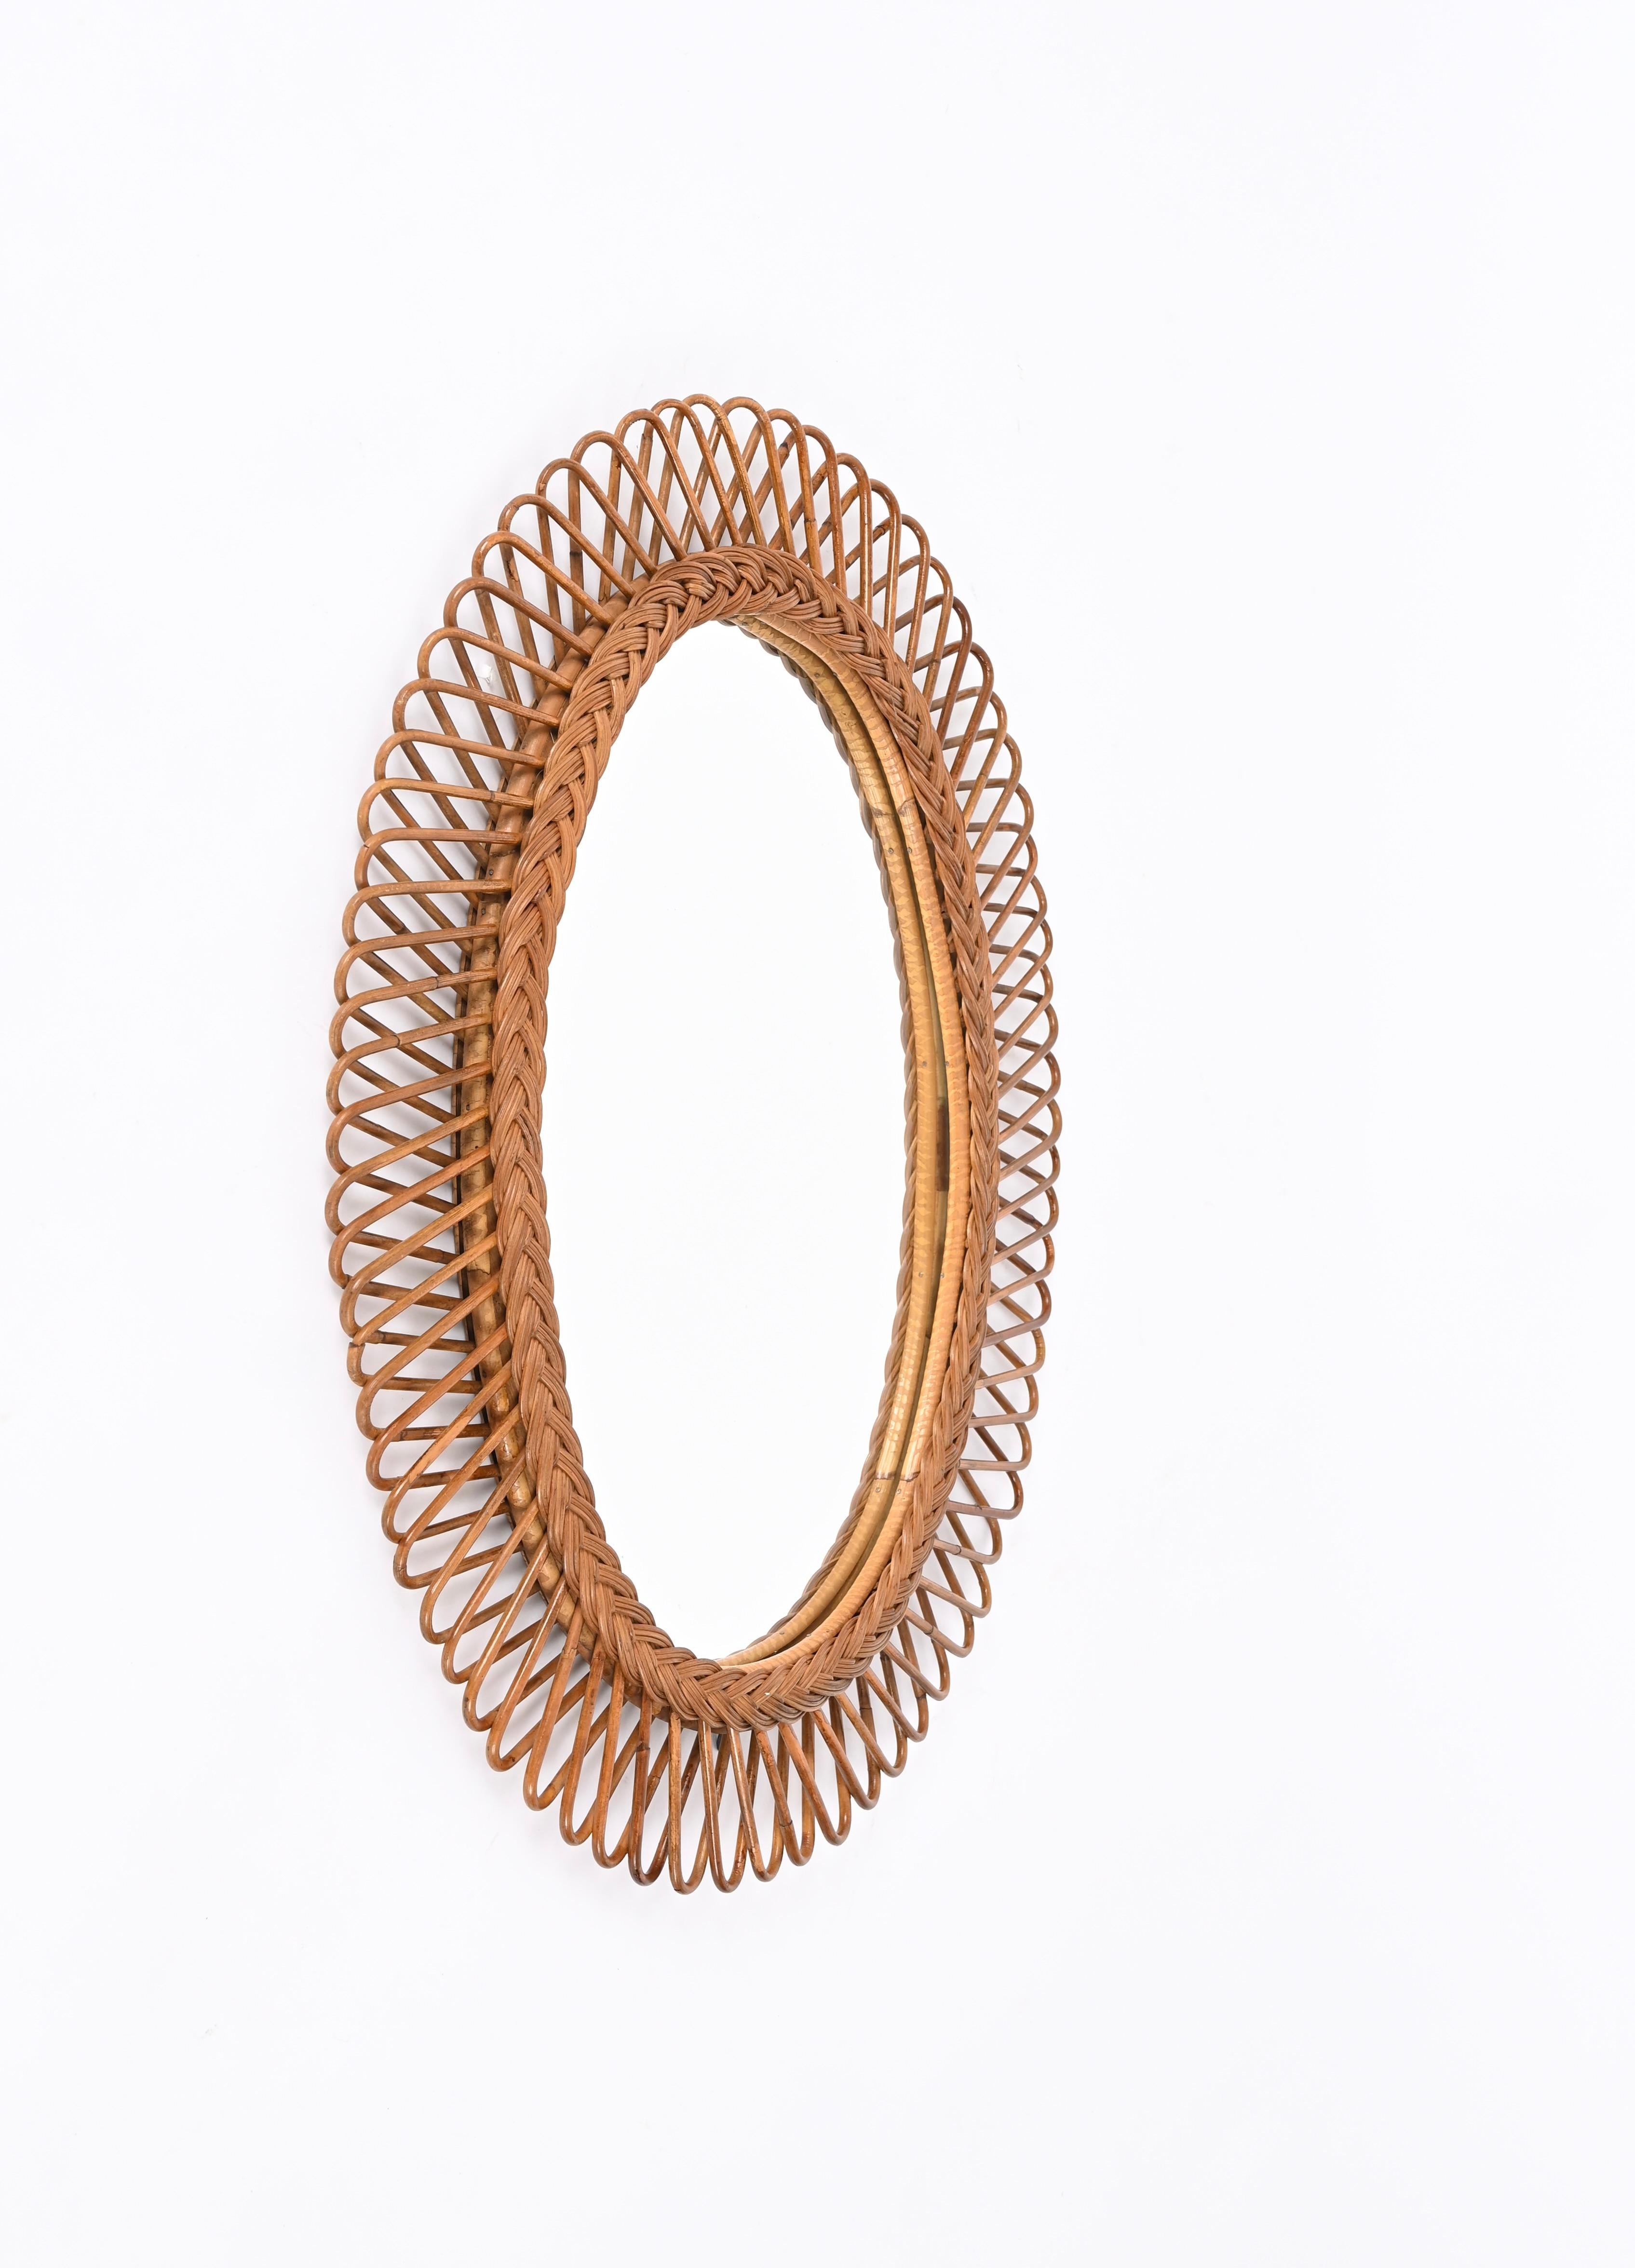 Mid-Century Modern Franco Albini Midcentury  Bamboo, Rattan and Wicker Oval Mirror,  Italy 1970s For Sale